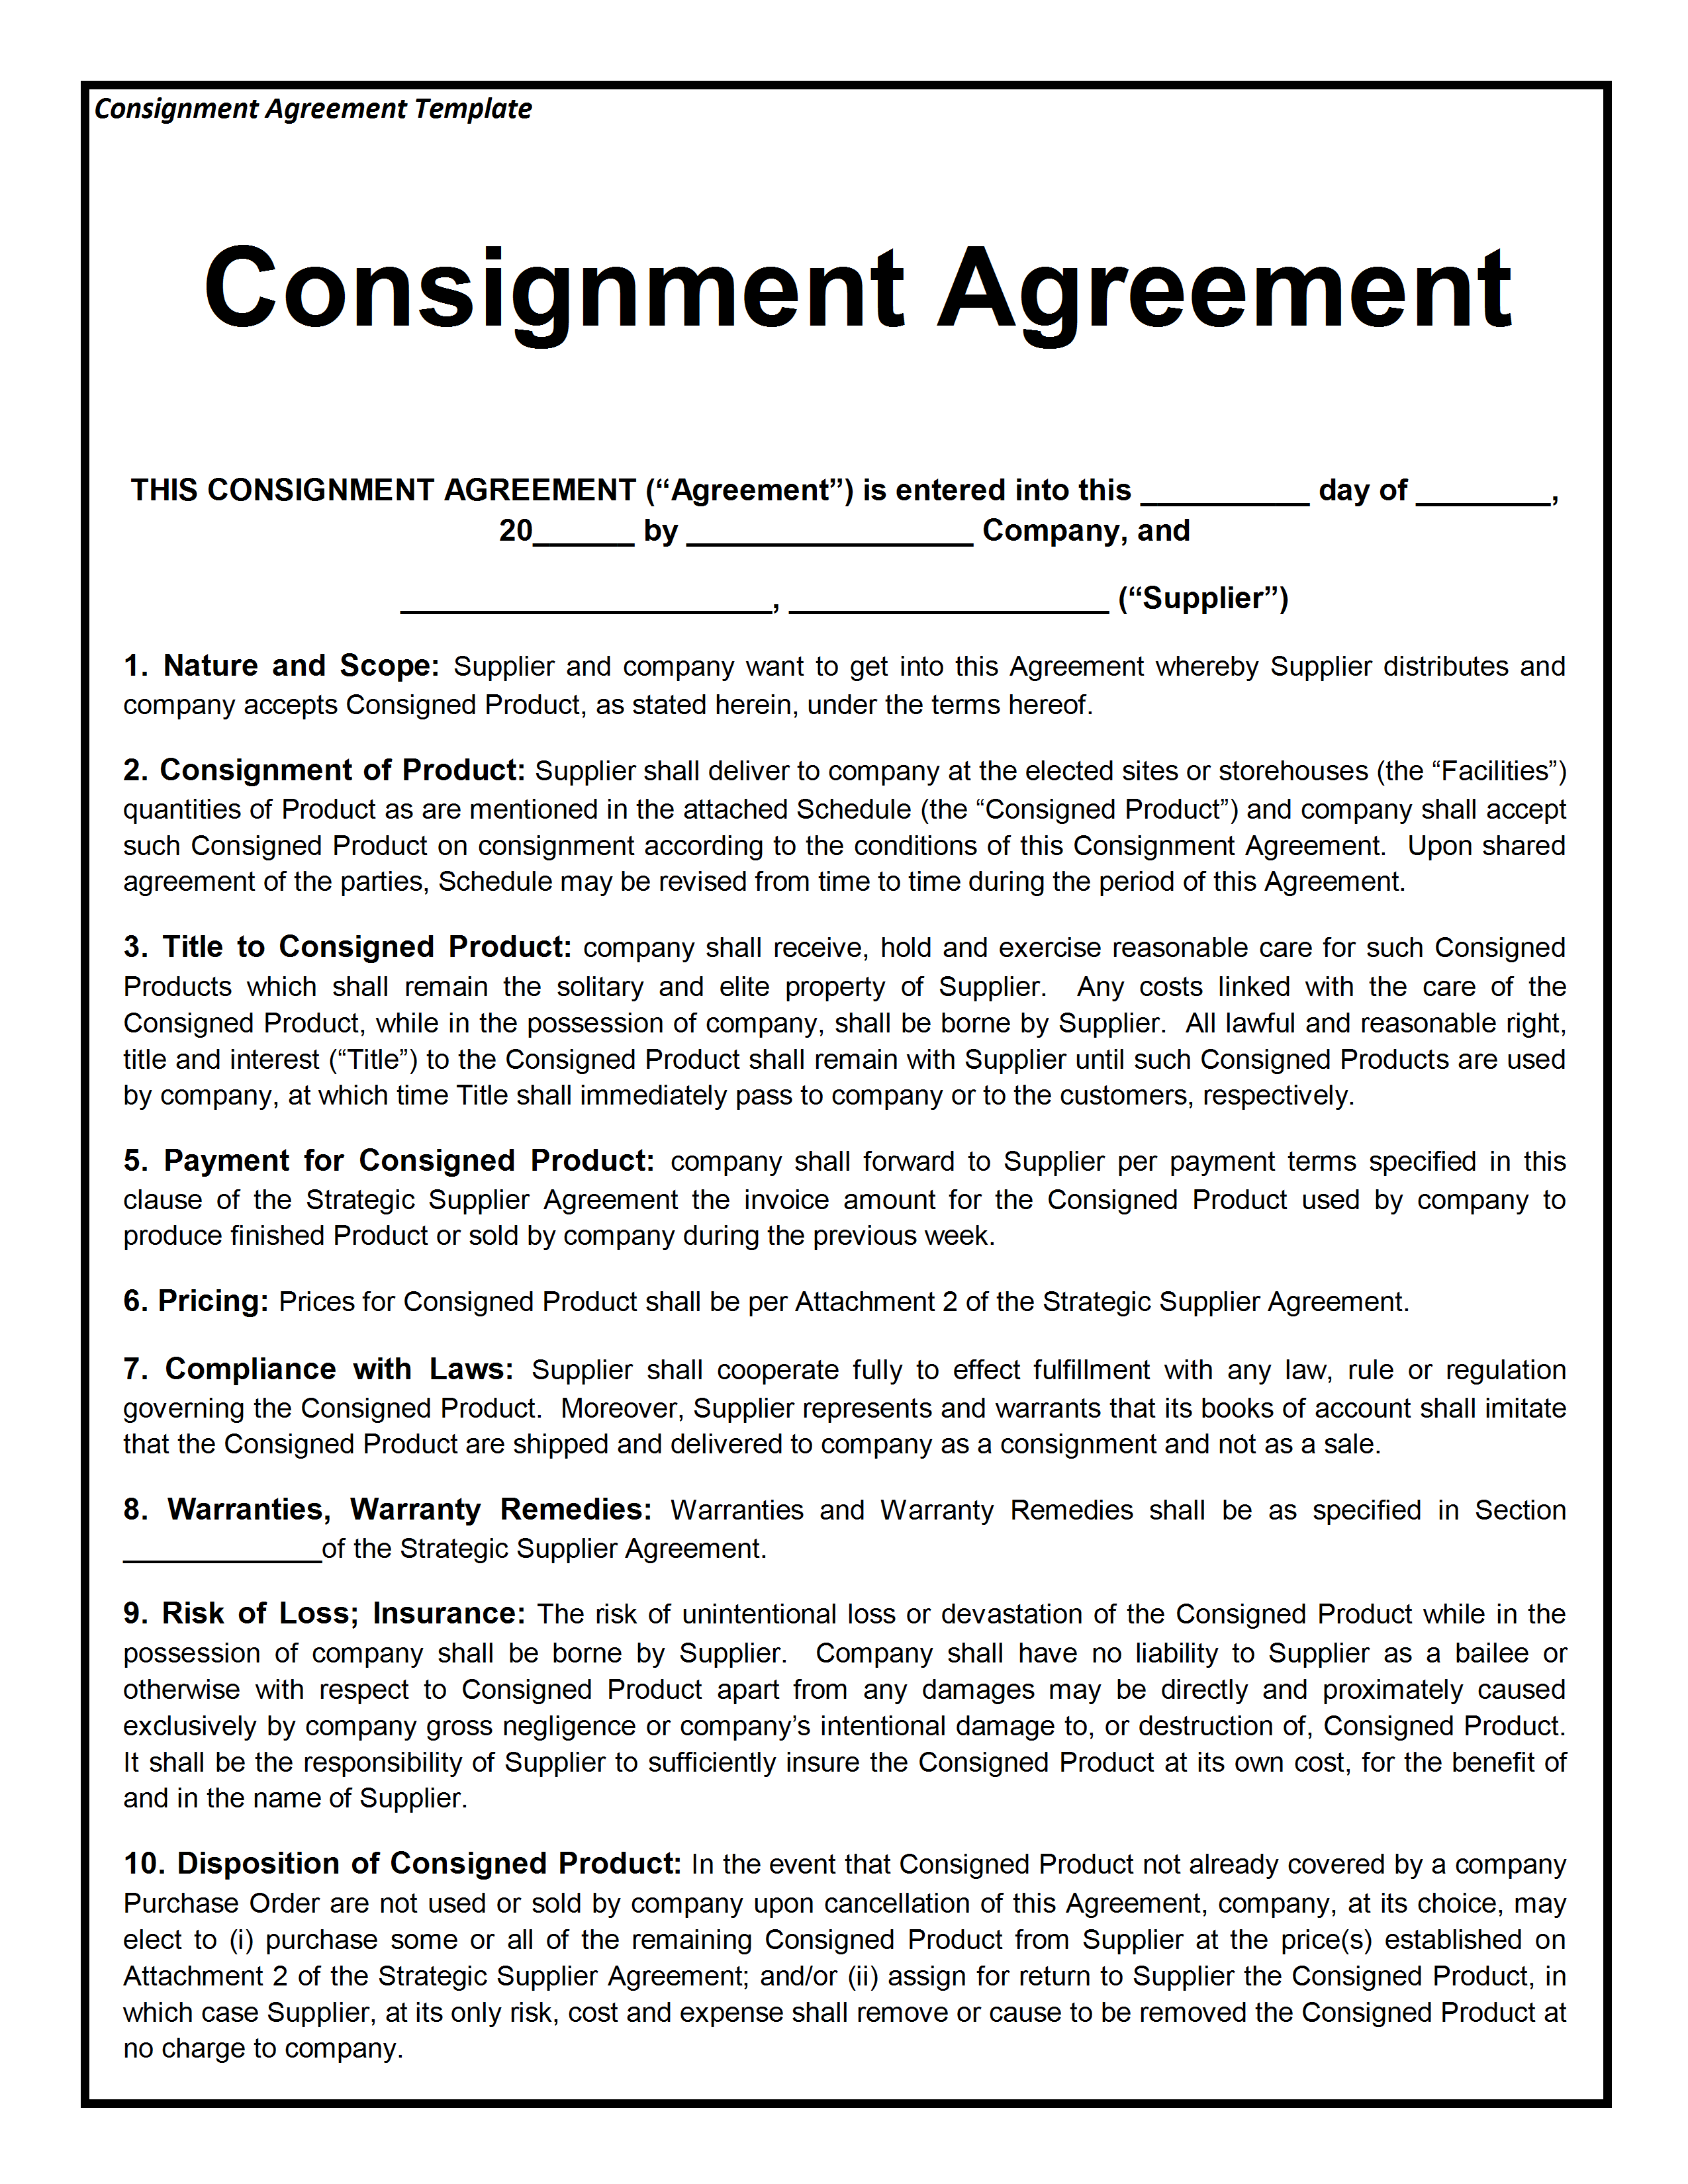 free-printable-consignment-agreement-form